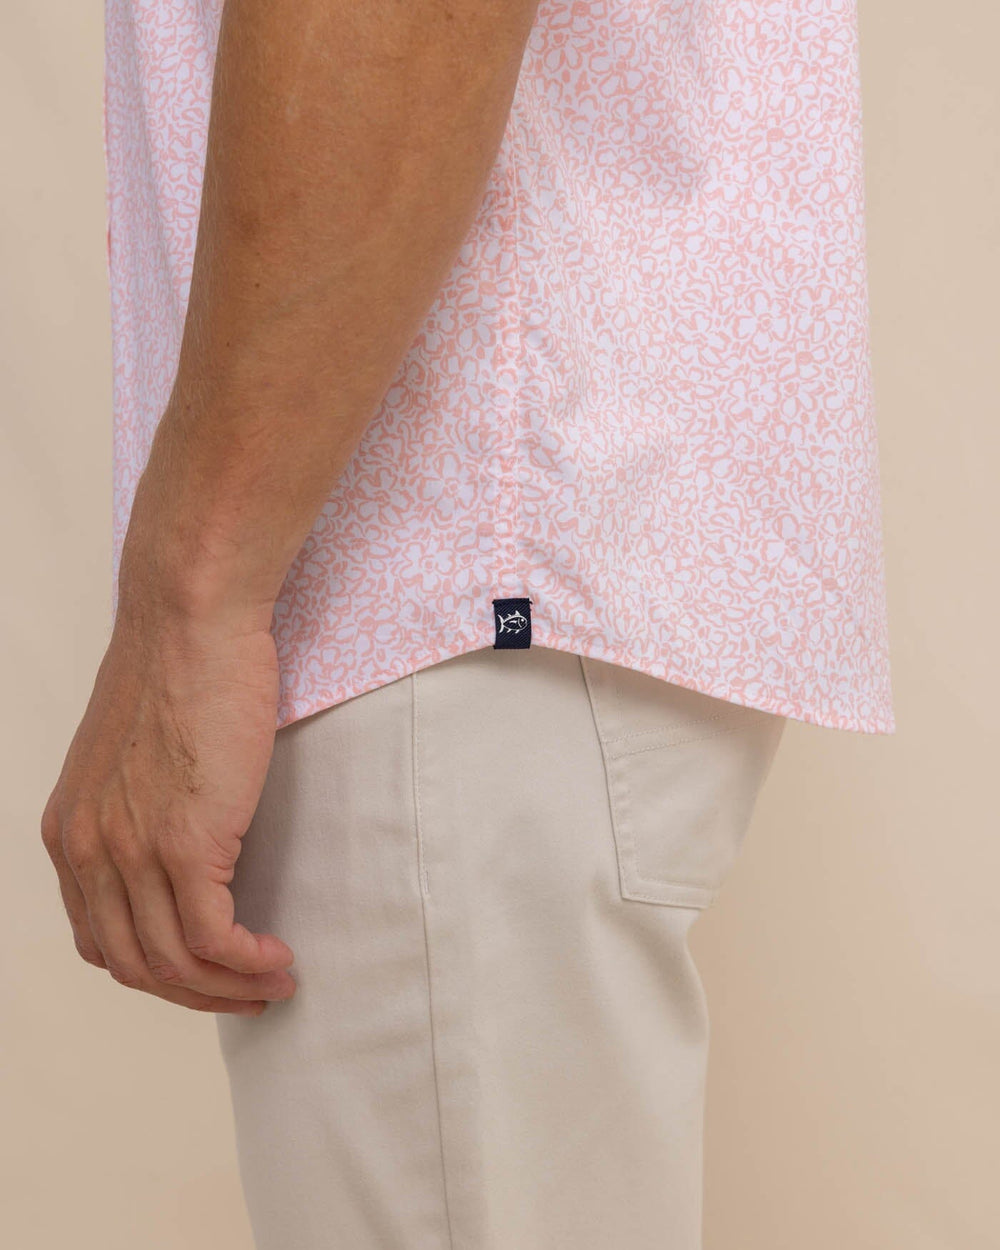 The detail view of the Southern Tide brrr Intercoastal That Floral Feeling Short Sleeve Sport Shirt by Southern Tide - Apricot Blush Coral